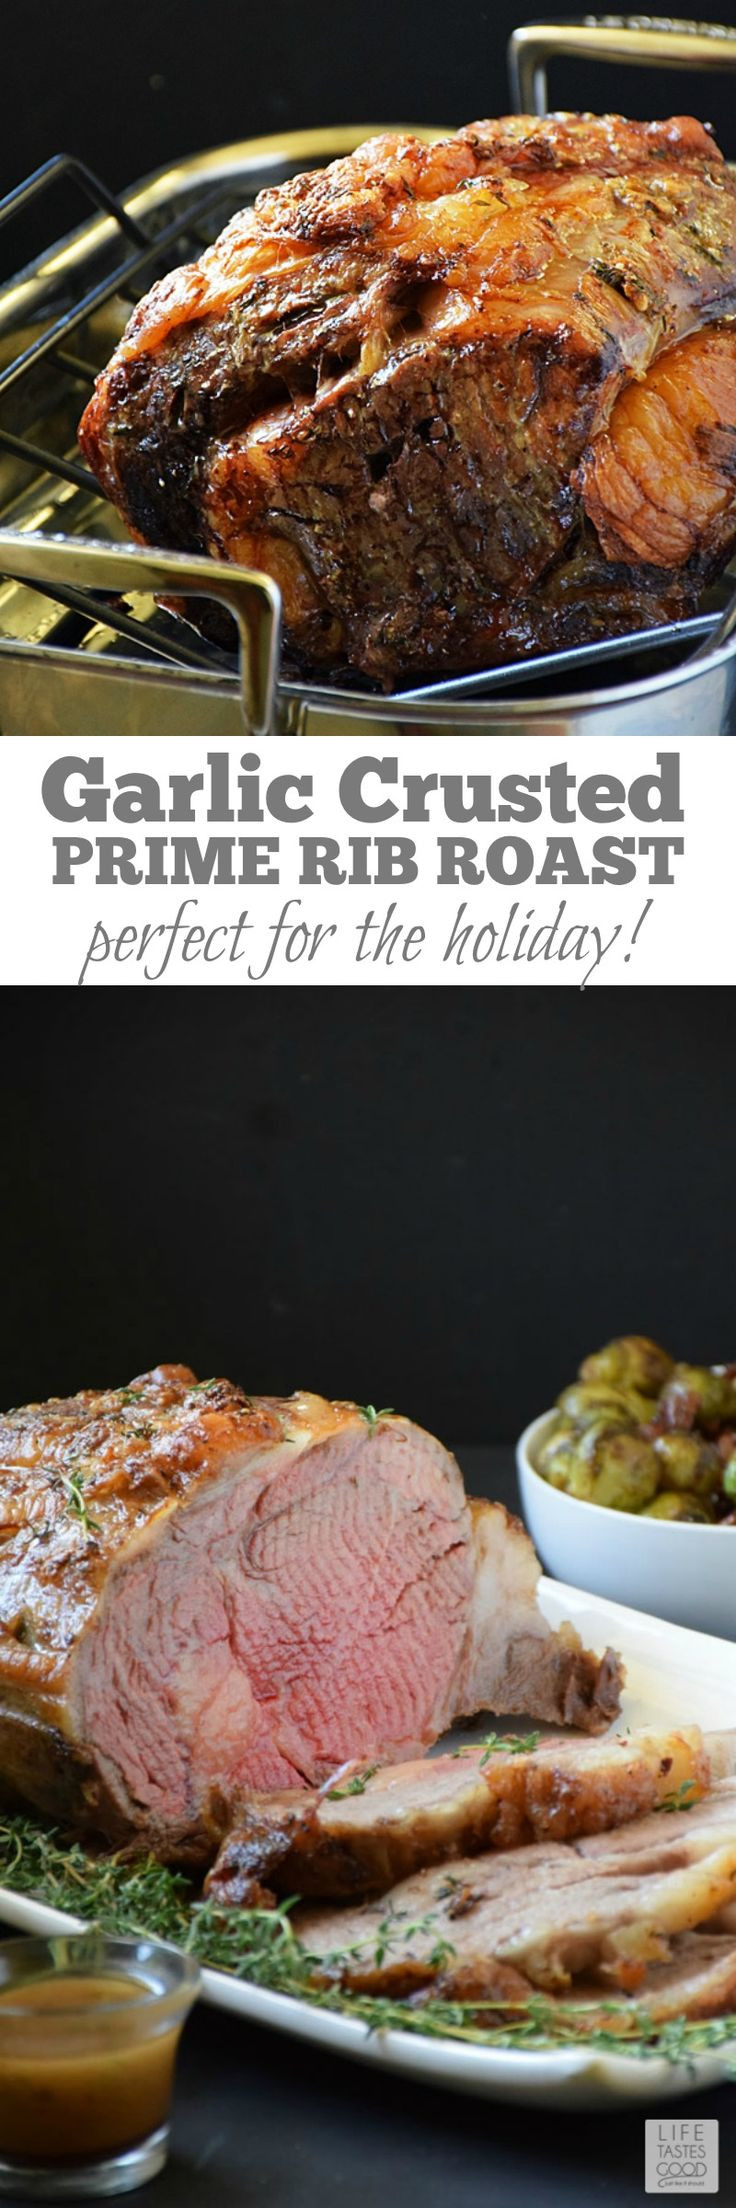 21 Best Prime Rib Sides for Christmas Dinner - Best Diet and Healthy Recipes Ever | Recipes ...